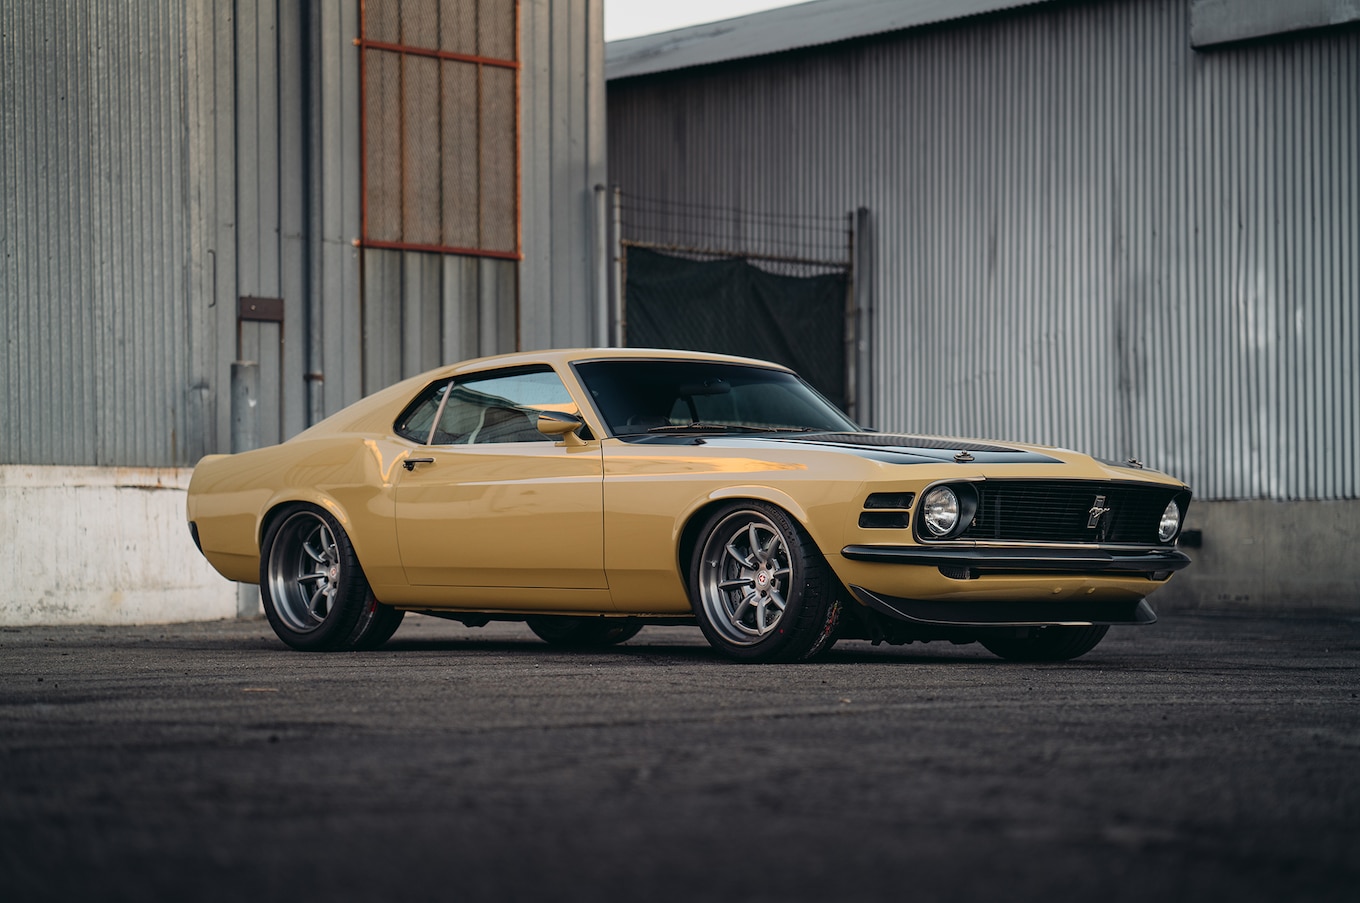 1970-Ford-Mustang-Boss-302-by-SpeedKore-and-Robert-Downey-Jr-front-three-quarter-01.jpg